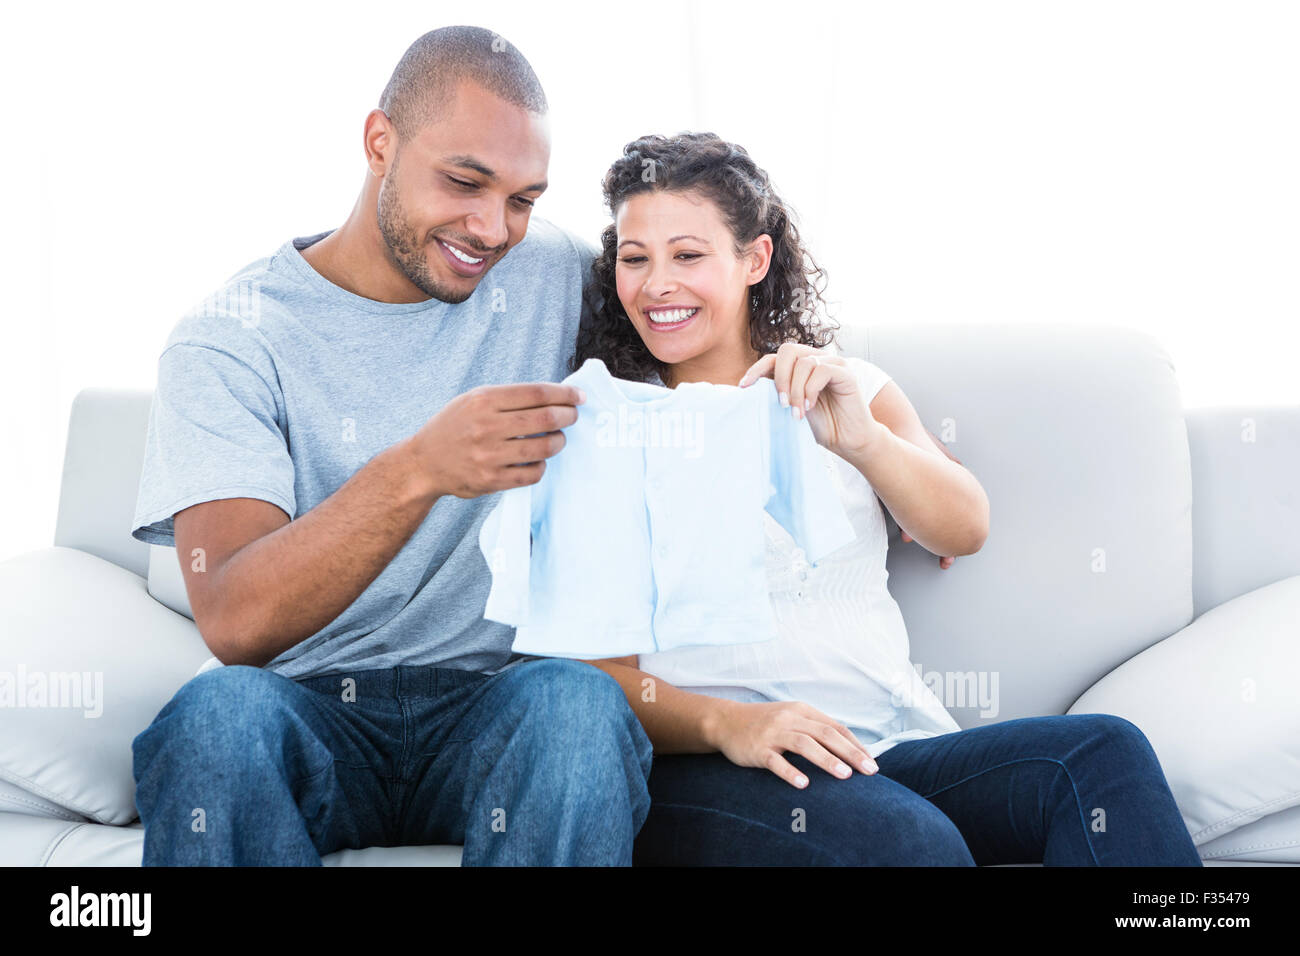 Couple looking at baby clothing Stock Photo